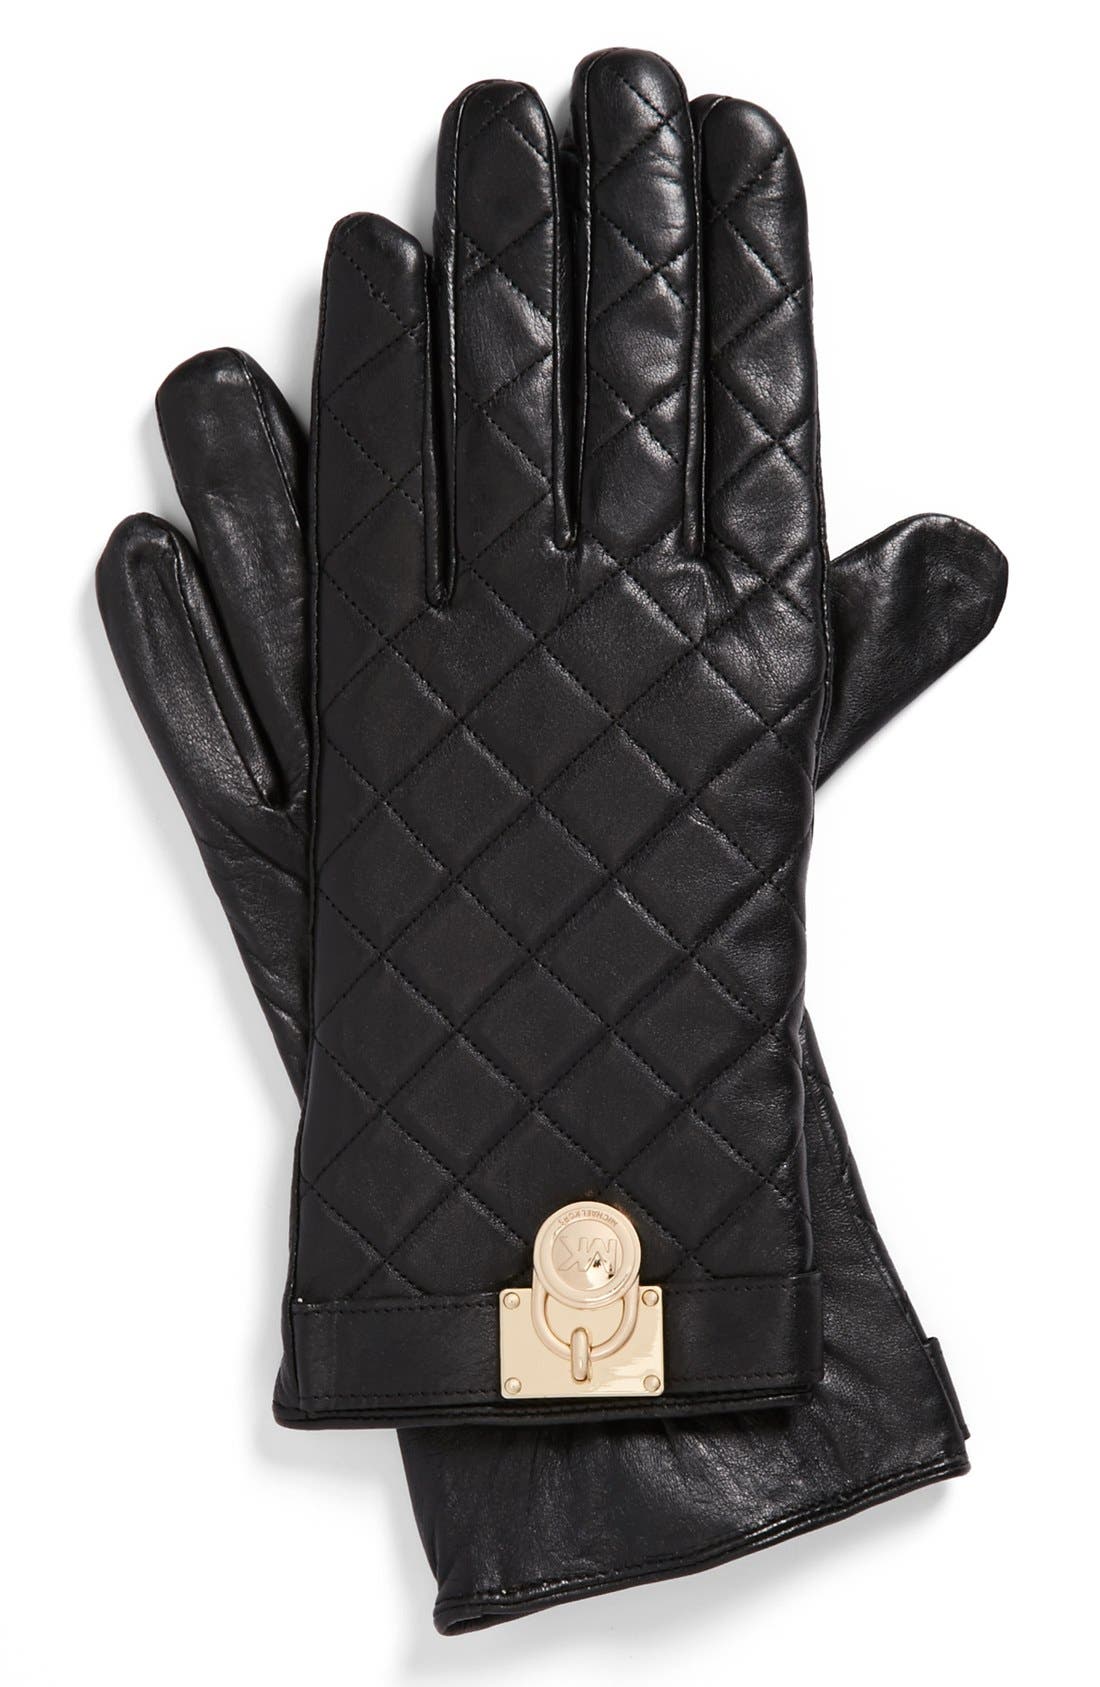 michael kors quilted leather gloves